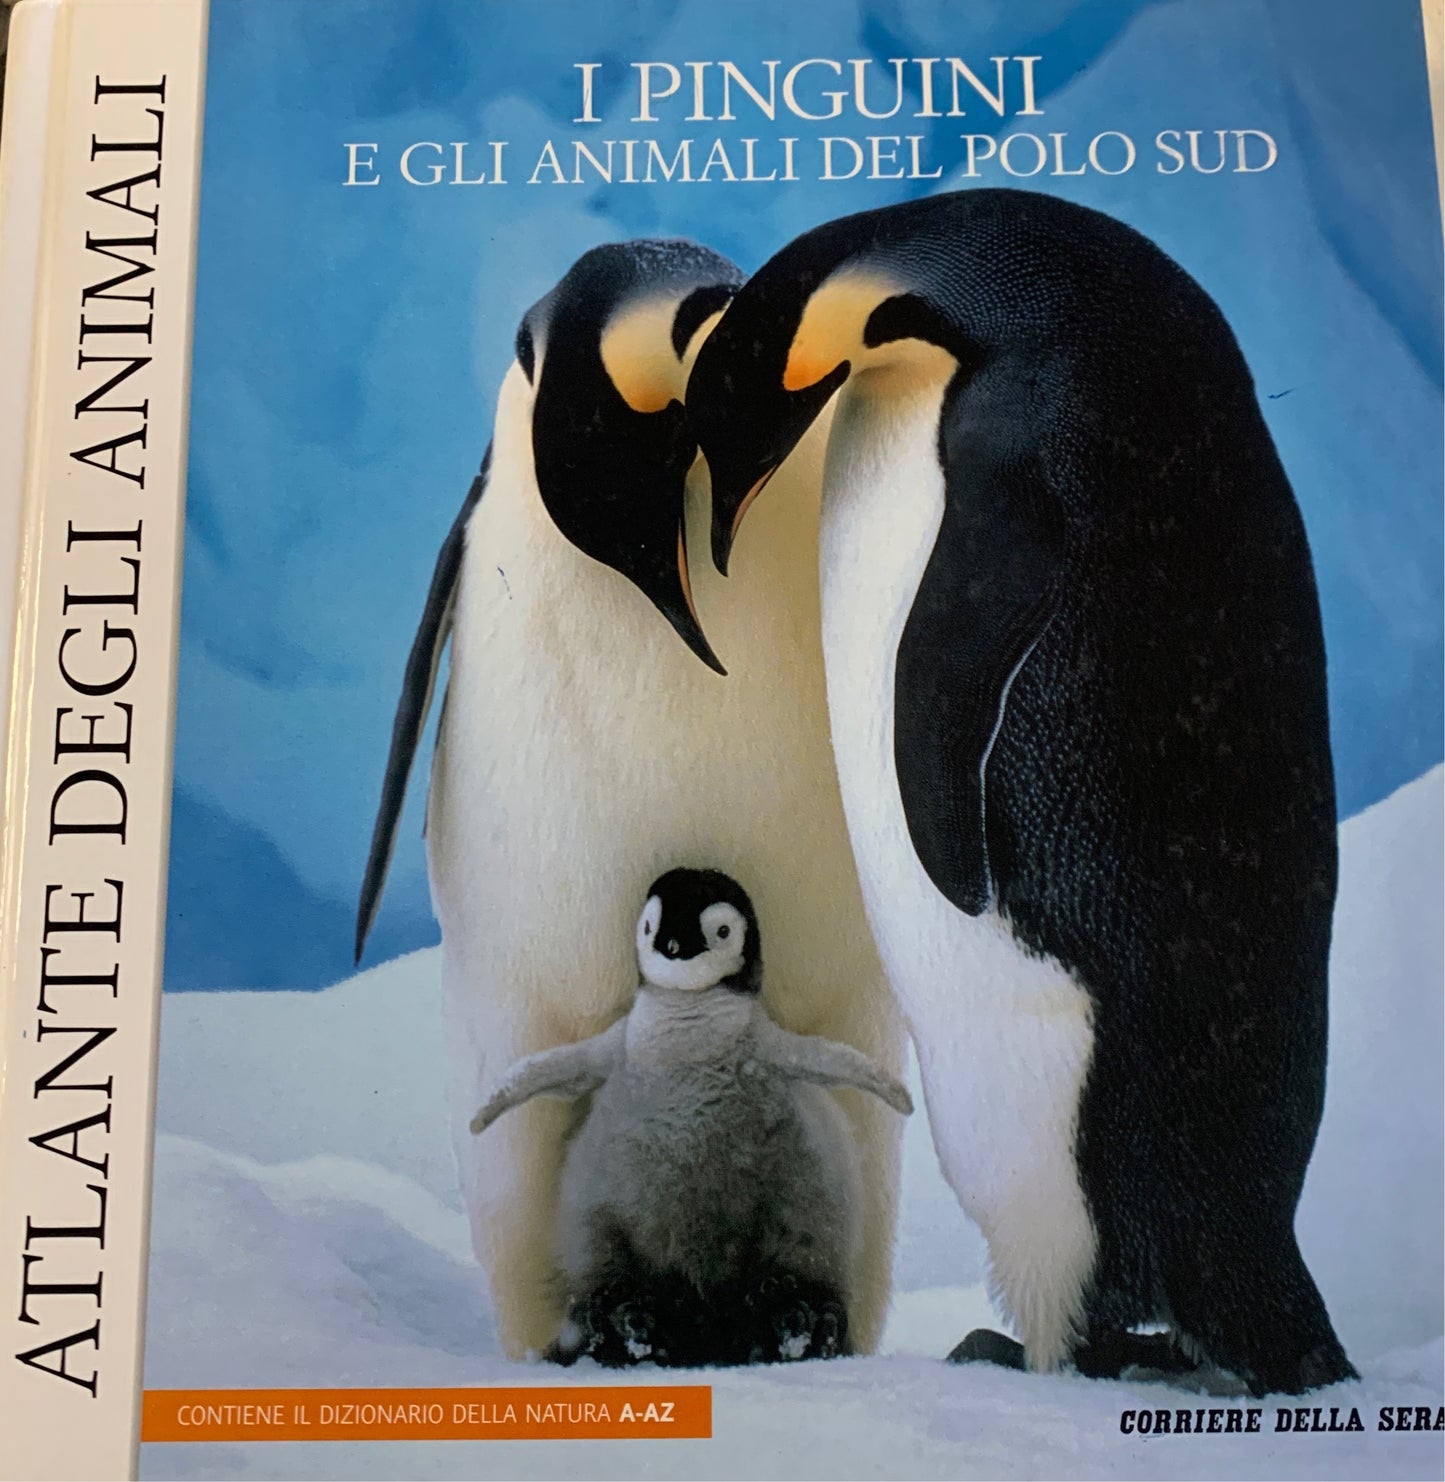 Penguins and animals of the South Pole